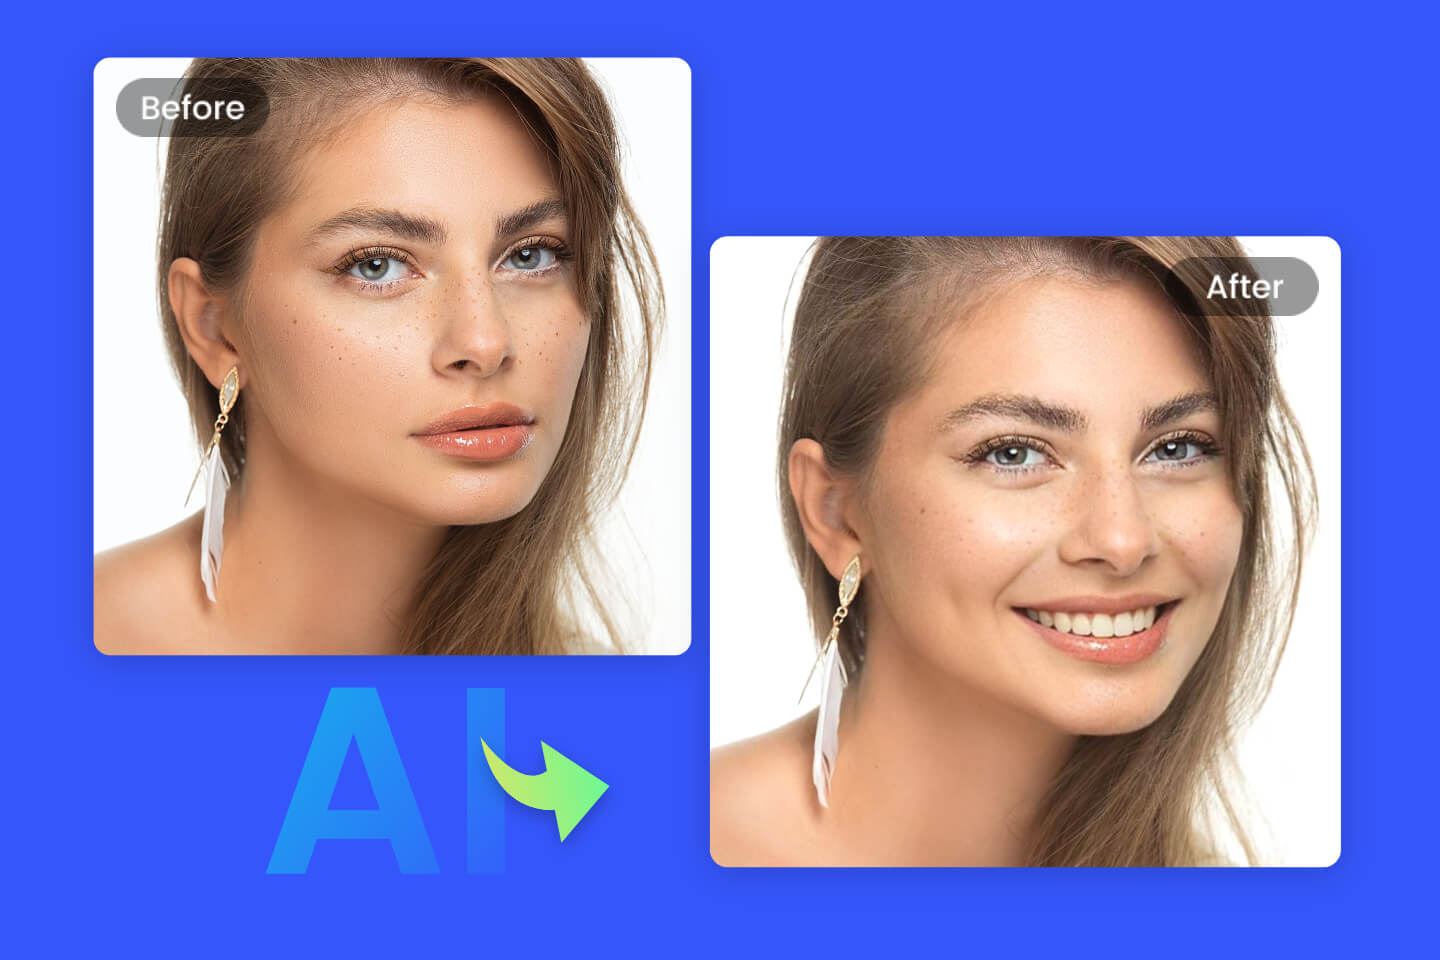 Smile Filter: Add Smile to Photo with AI | Fotor